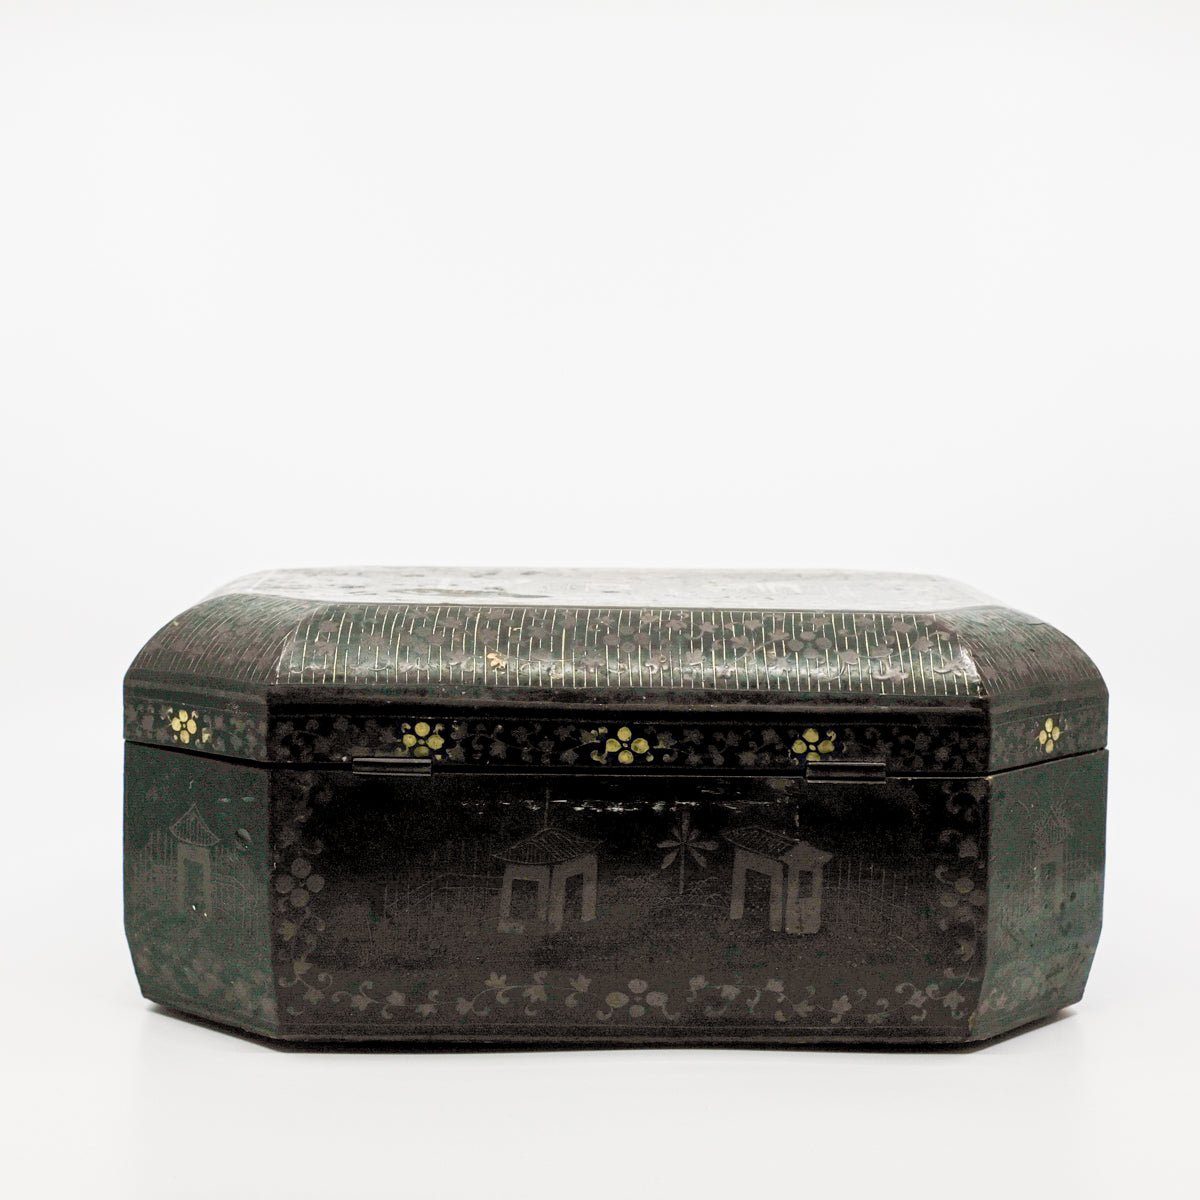 back view of black and gold paper marche lidded box